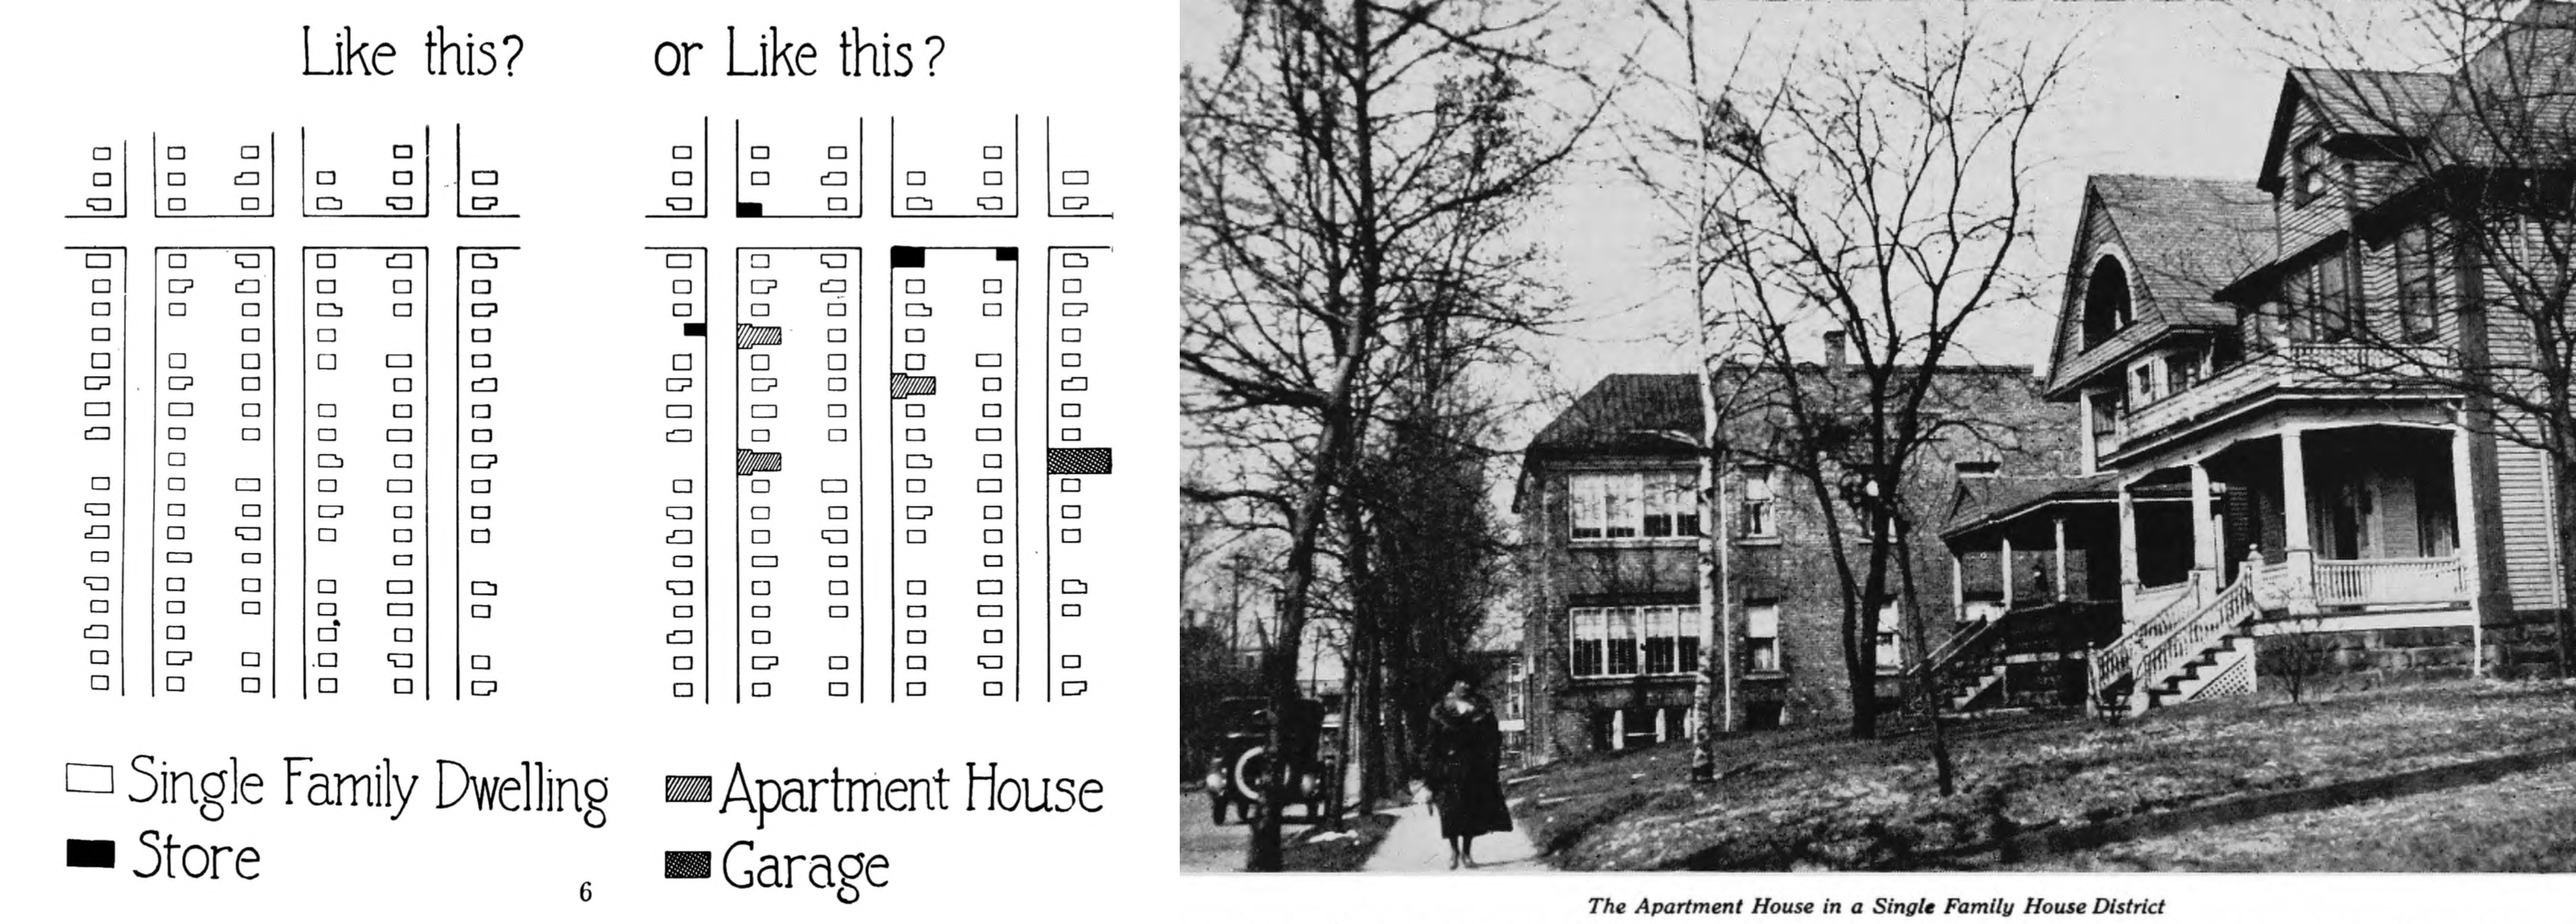 Whitten illustrated his zoning reports to praise neighborhoods with only single-family homes (left image), and to oppose mixing them with apartment buildings and small businesses (center and right images). Source: Cleveland Zone Plan, 1921, hosted by HathiTrust.